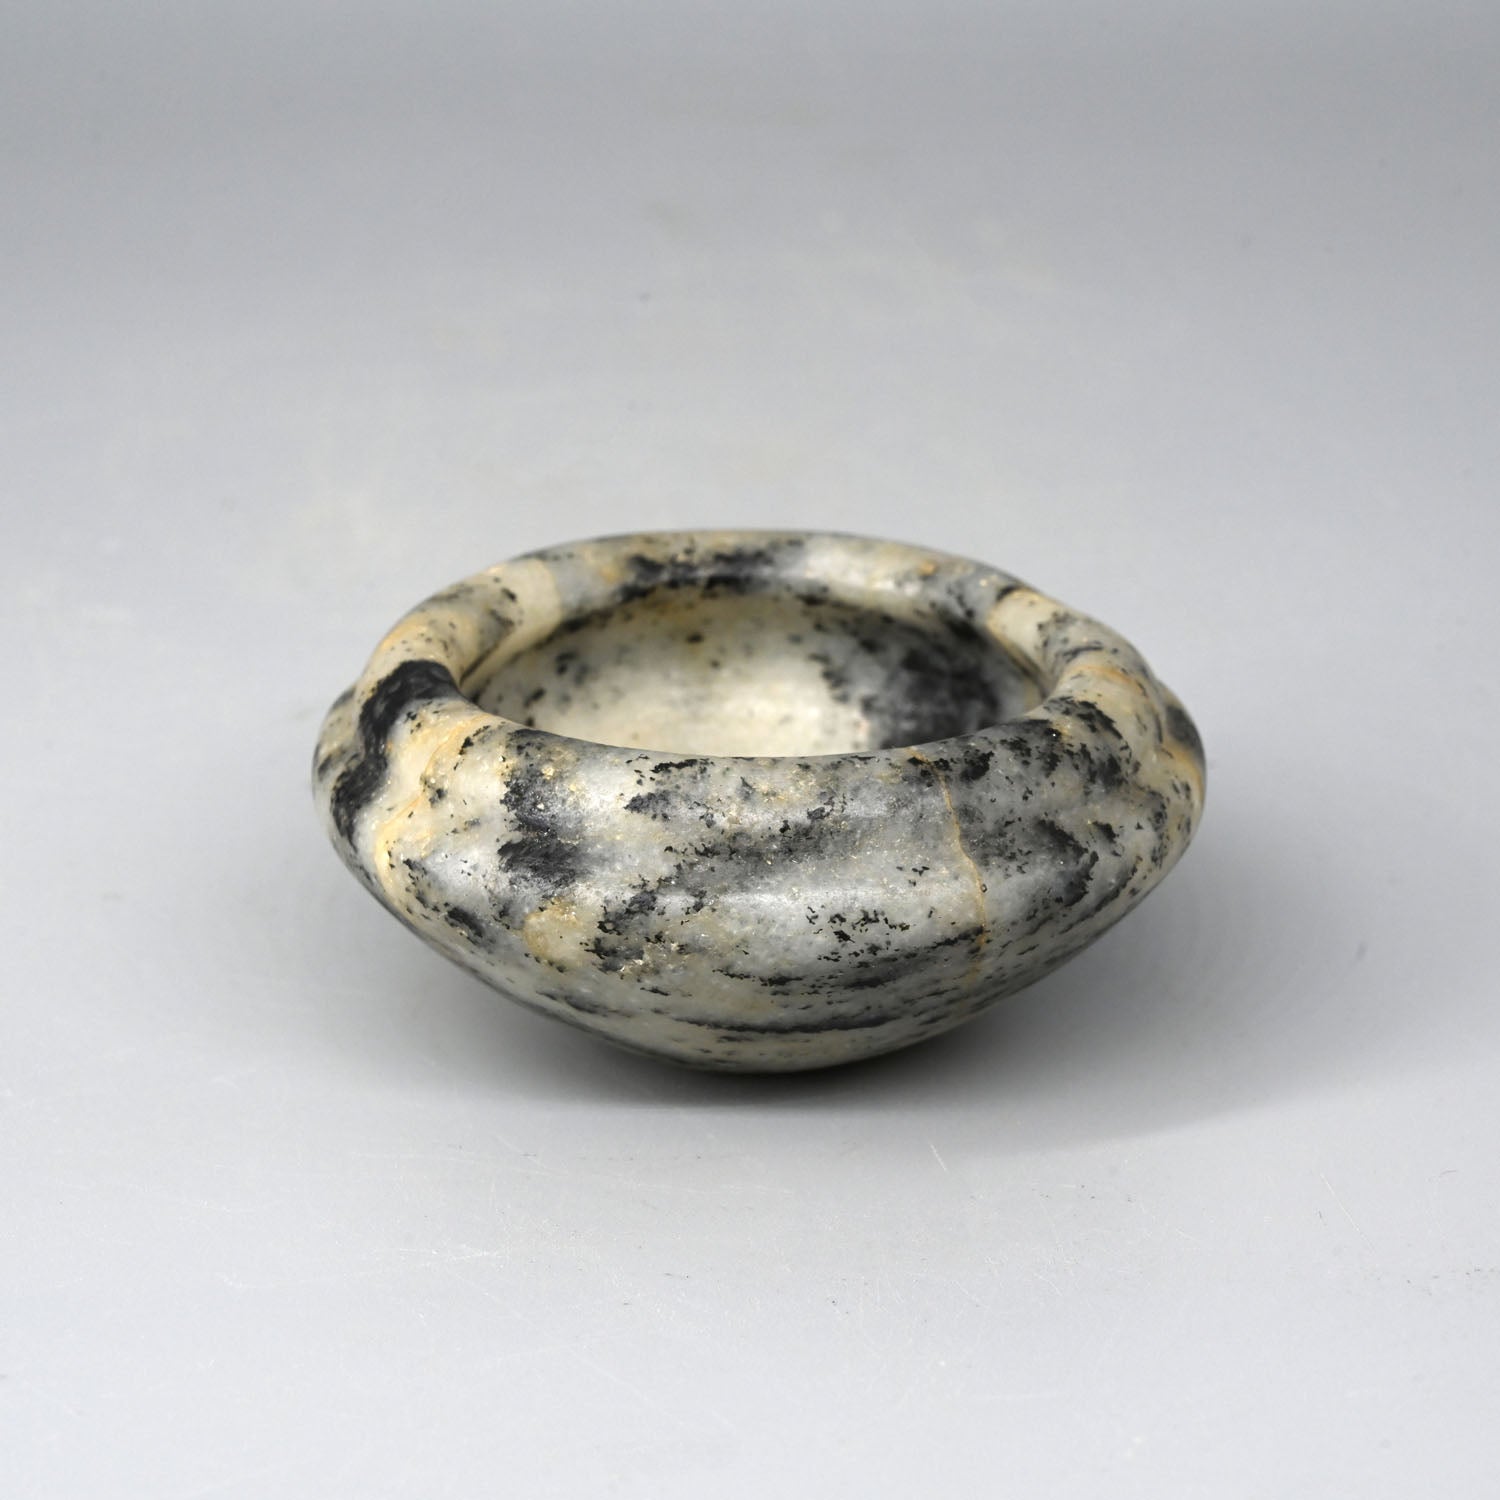 A fine Egyptian Anorthosite Gneiss Bowl, early Dynastic Period, Dynasty 2, ca. 2770 - 2649 BCE